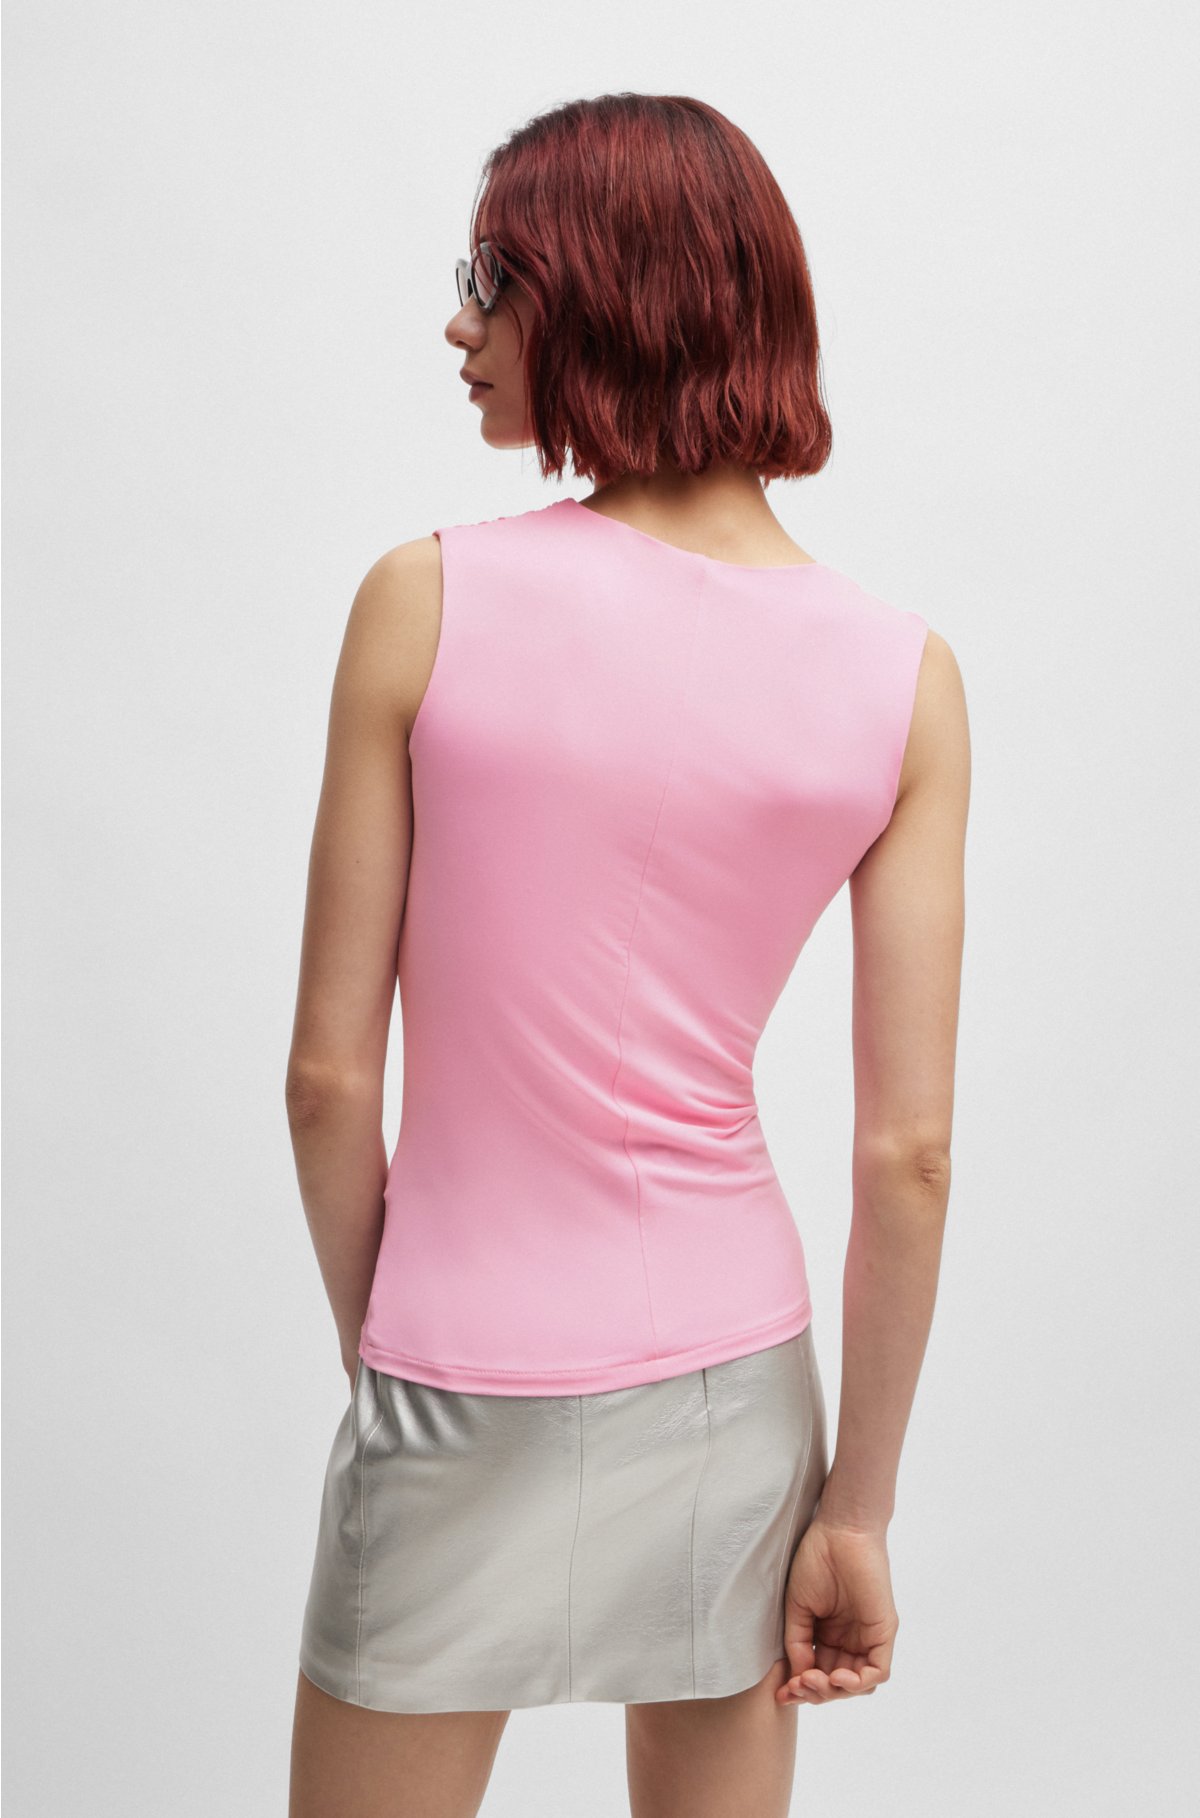 Slim-fit top with asymmetric details and stacked logo, light pink